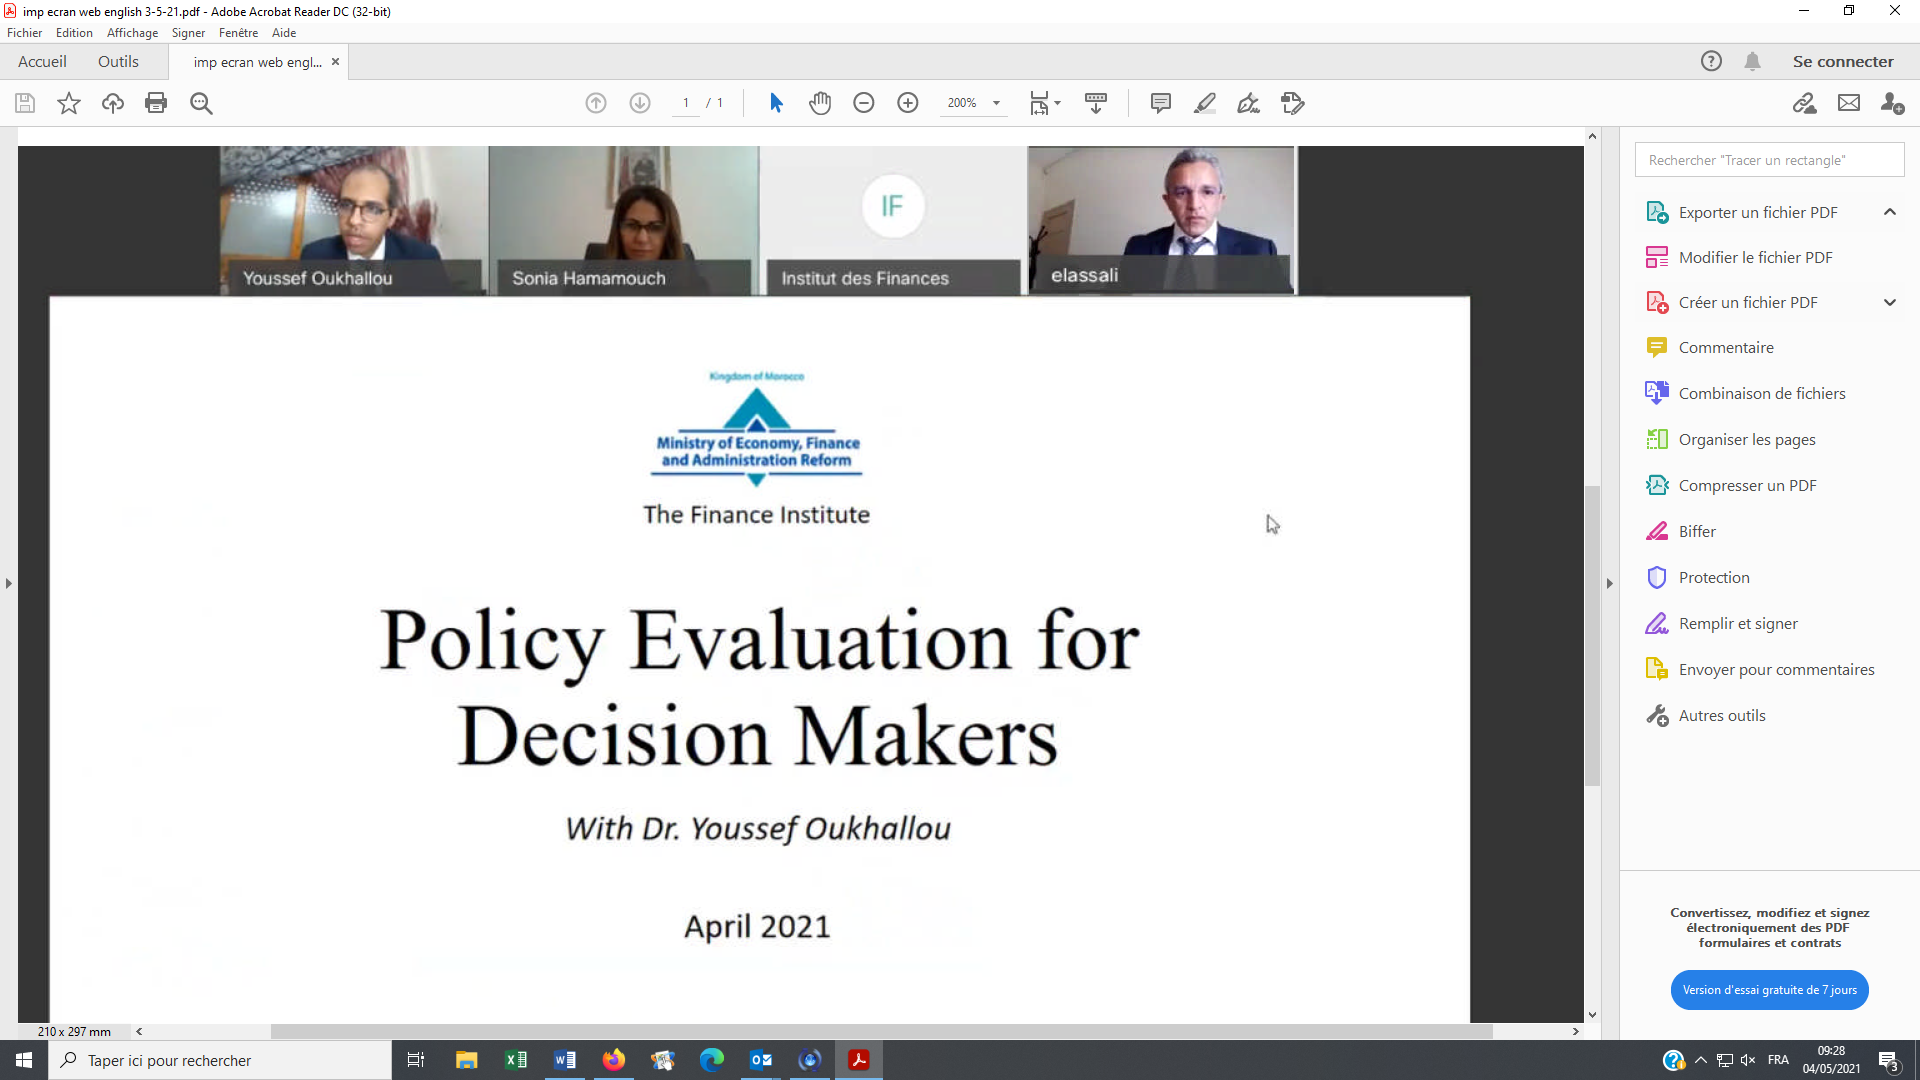  Webinar: “Policy Evaluation for Decision-makers” Hosted by Dr Youssef OUKHALLOU